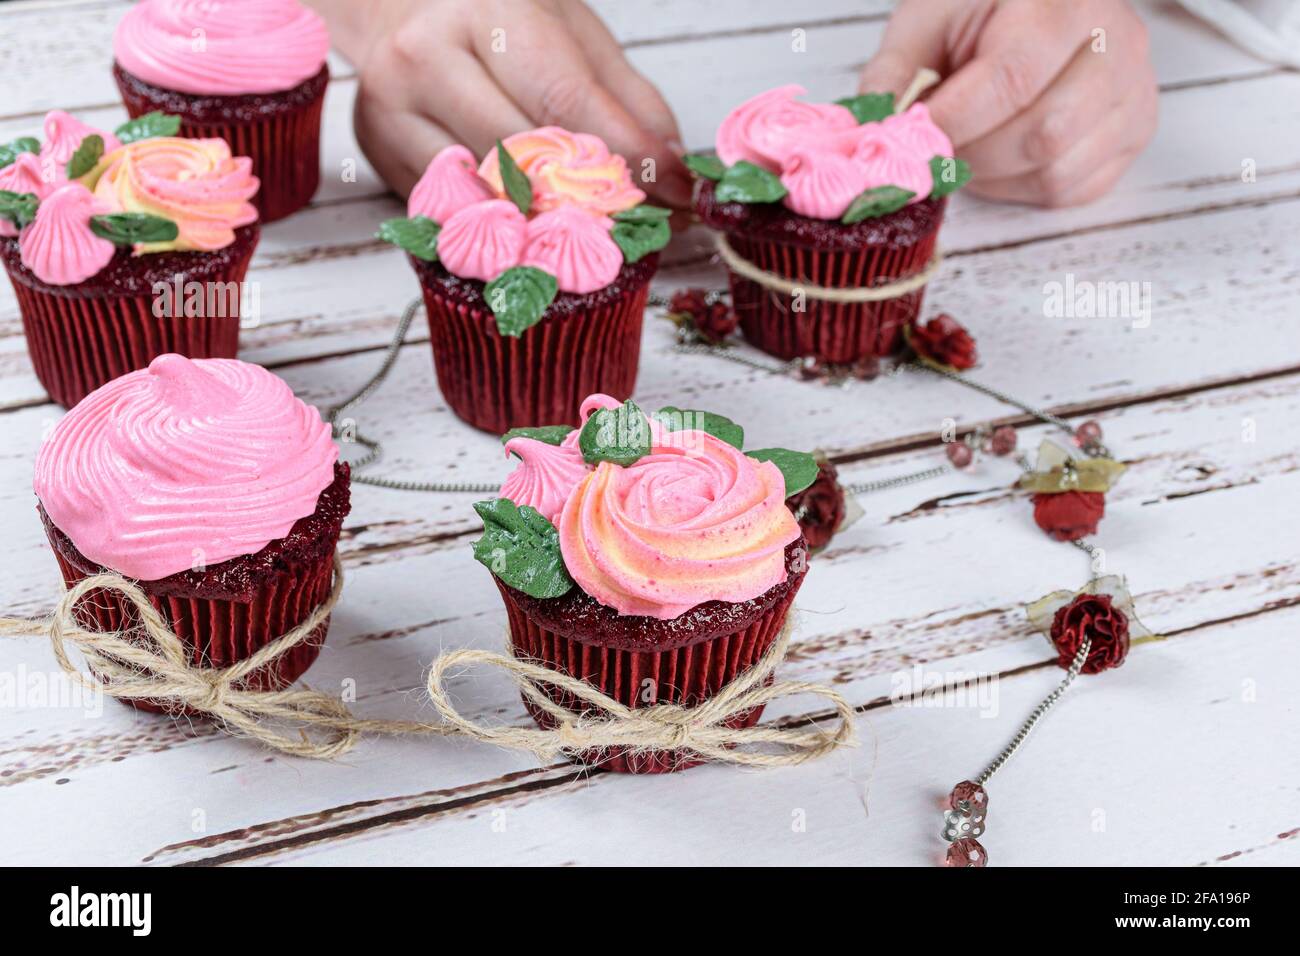 Red velvet cupcakes decorated with sisal yarn bow, next to a female necklace. In the background, confectioner decorating a cupcake. Stock Photo